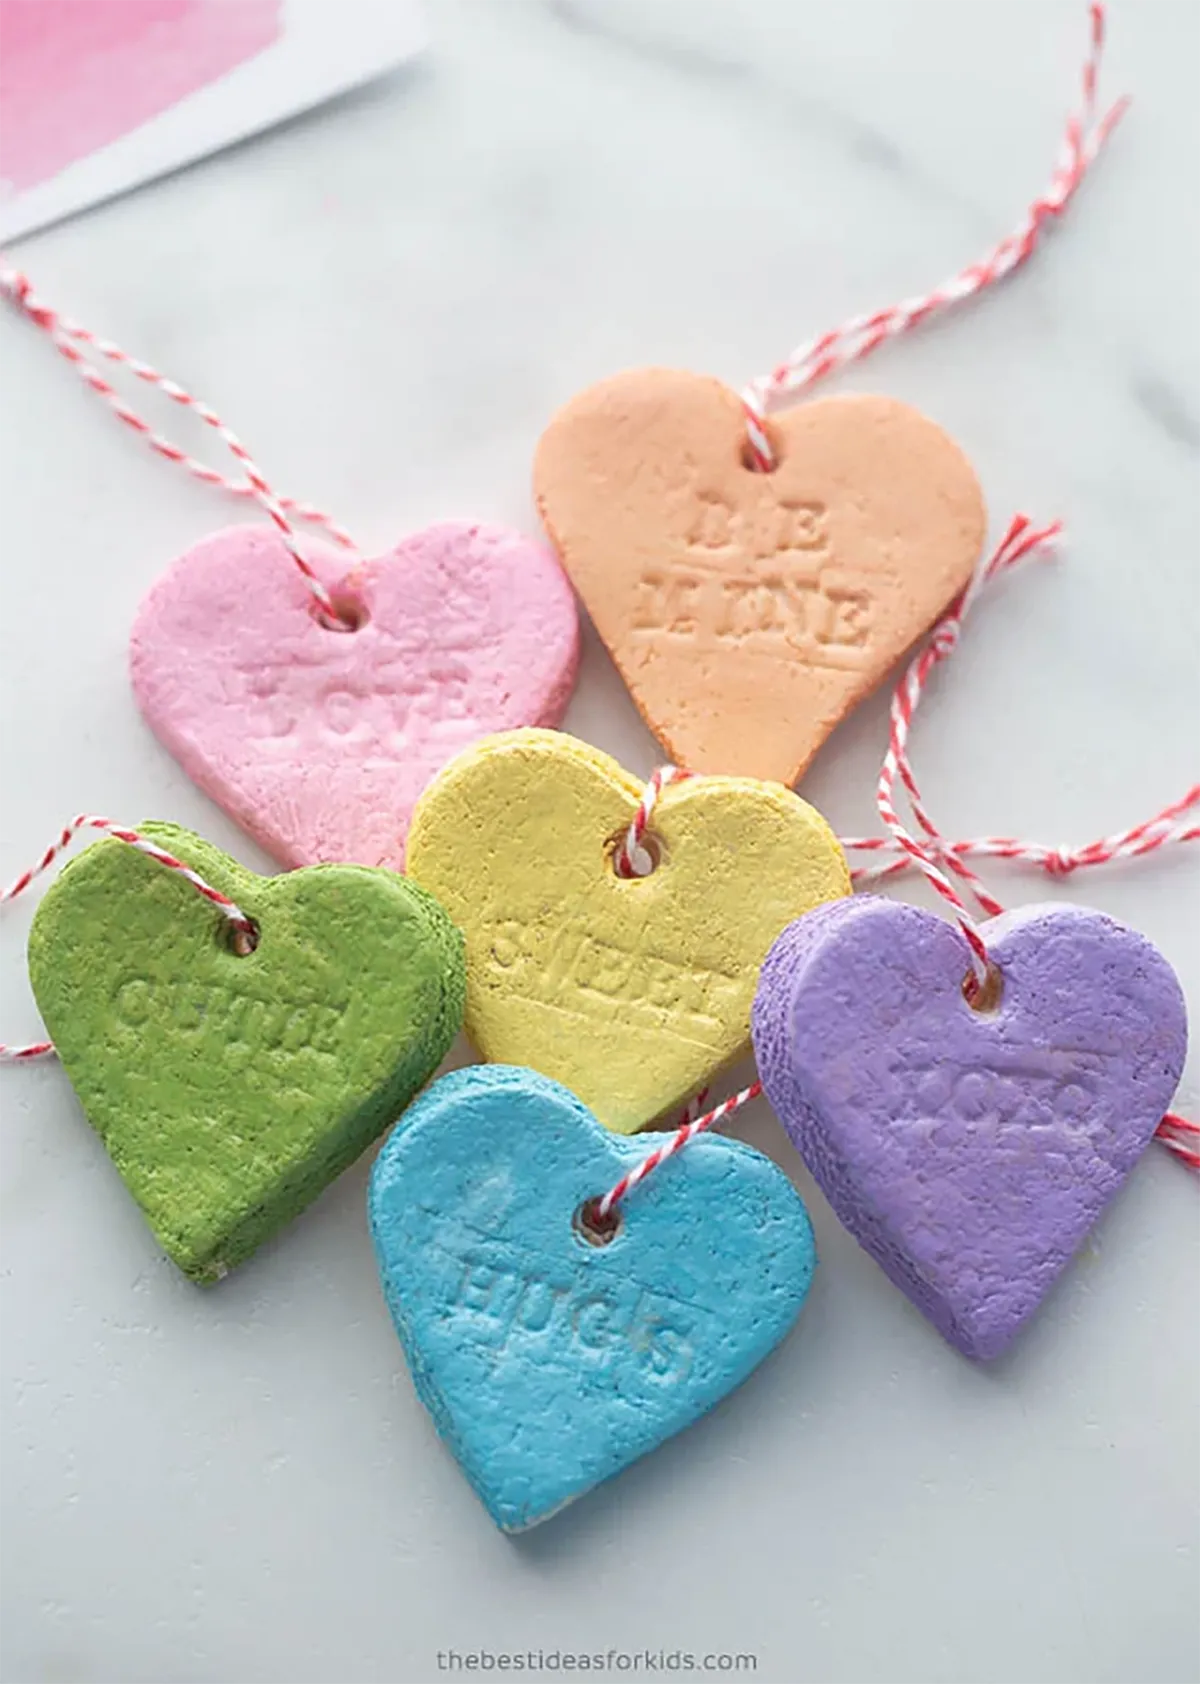 Salt dough in colourful heart shapes - valentines crafts for kids